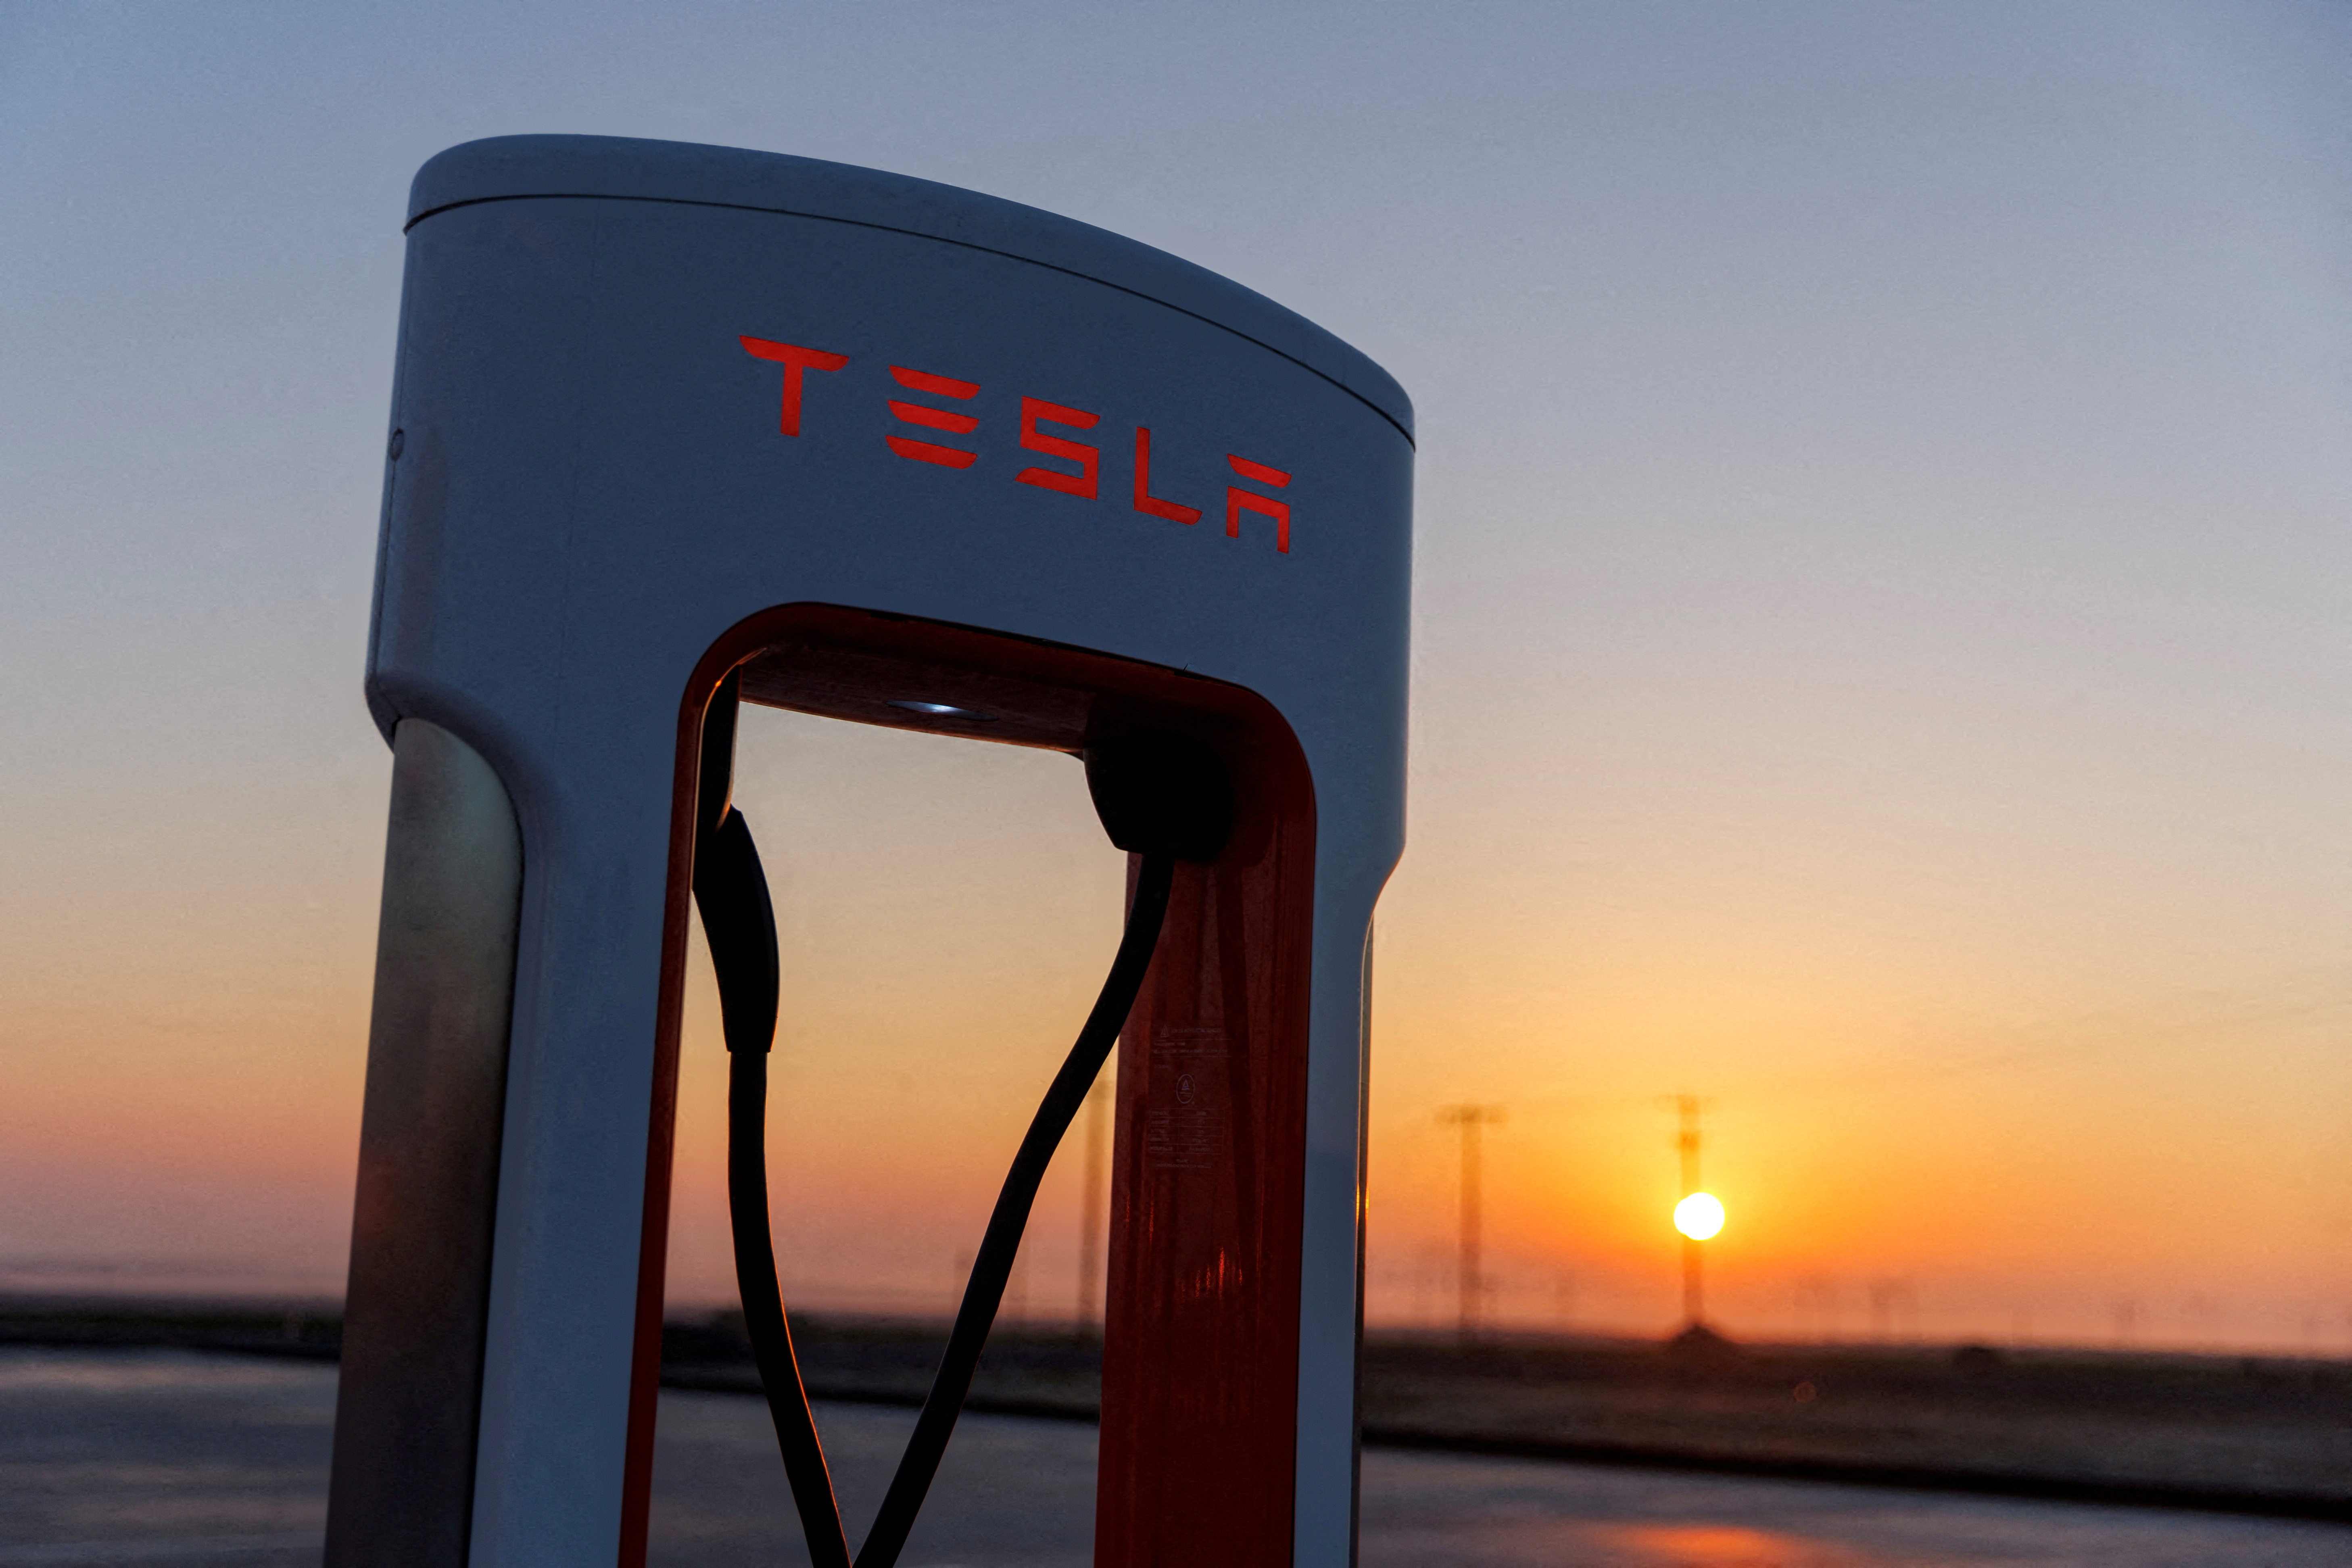 A Tesla supercharging station in California